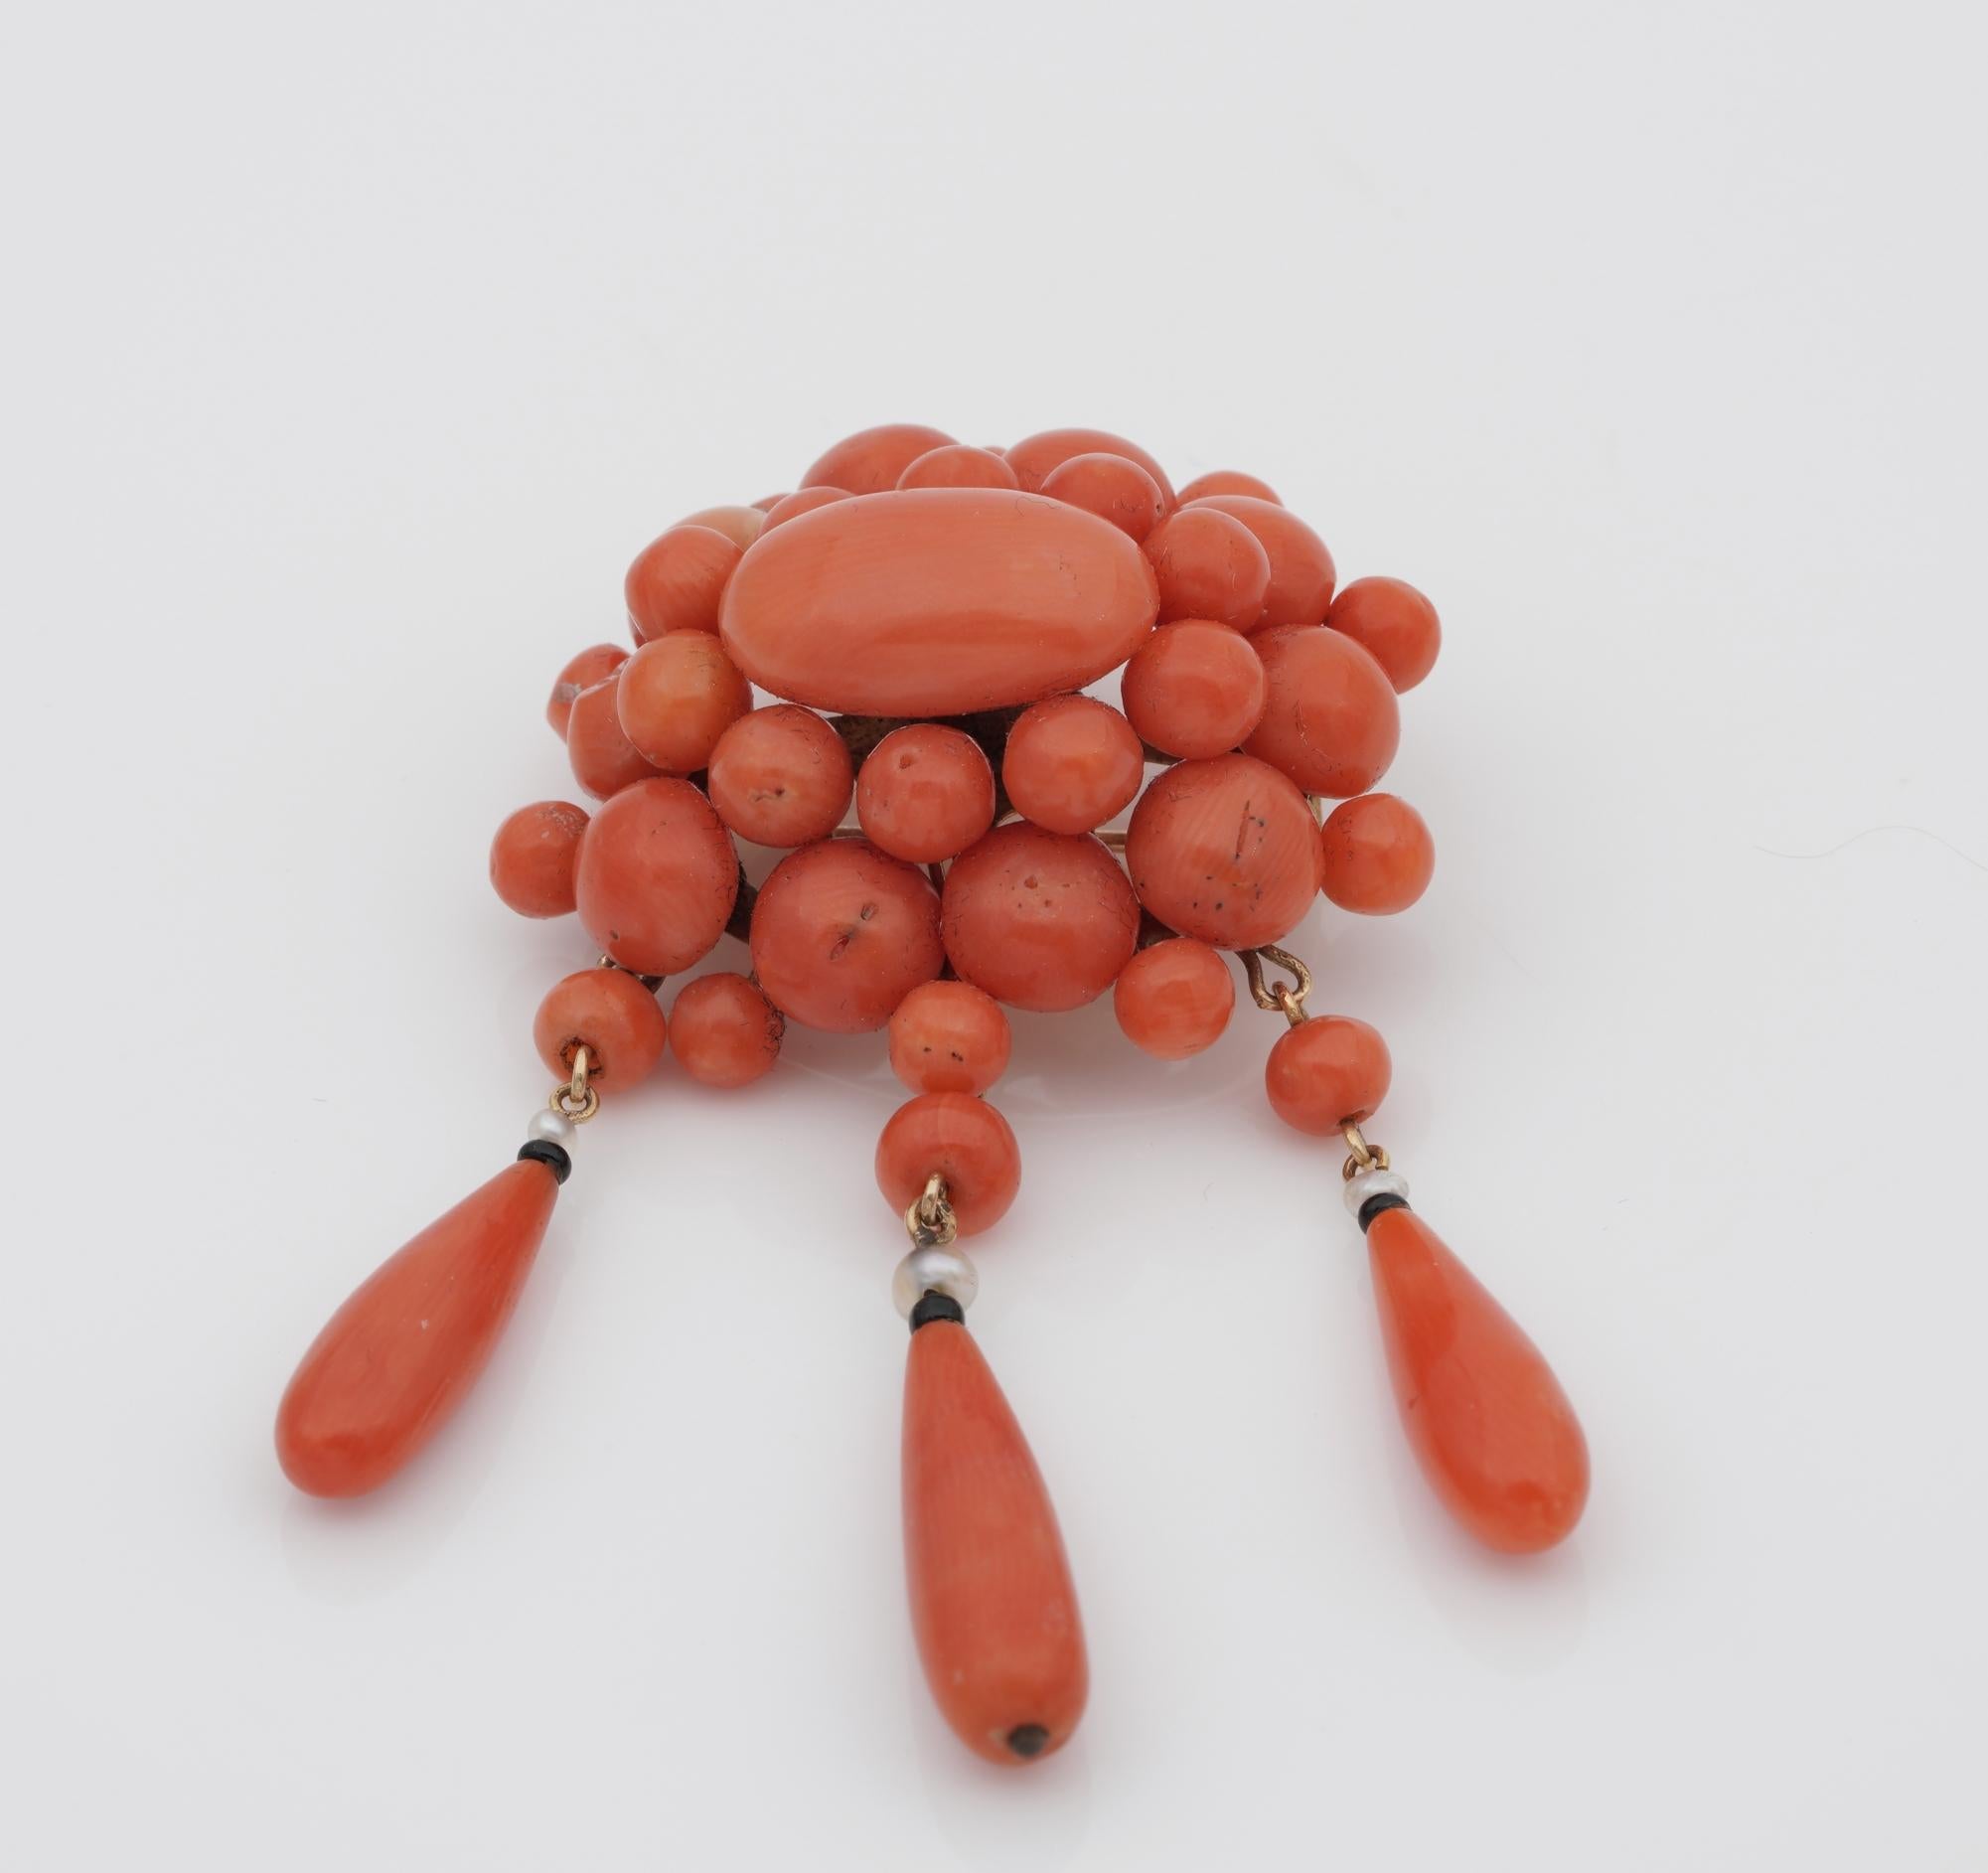 Coral Treasures

Beautiful antique Coral treasure to cherish
The ageless allure of antique Coral is even more sought after with the time passing by
This beautiful French example is pre 1850 bearing eagle's head of the period standing for 18 KT gold